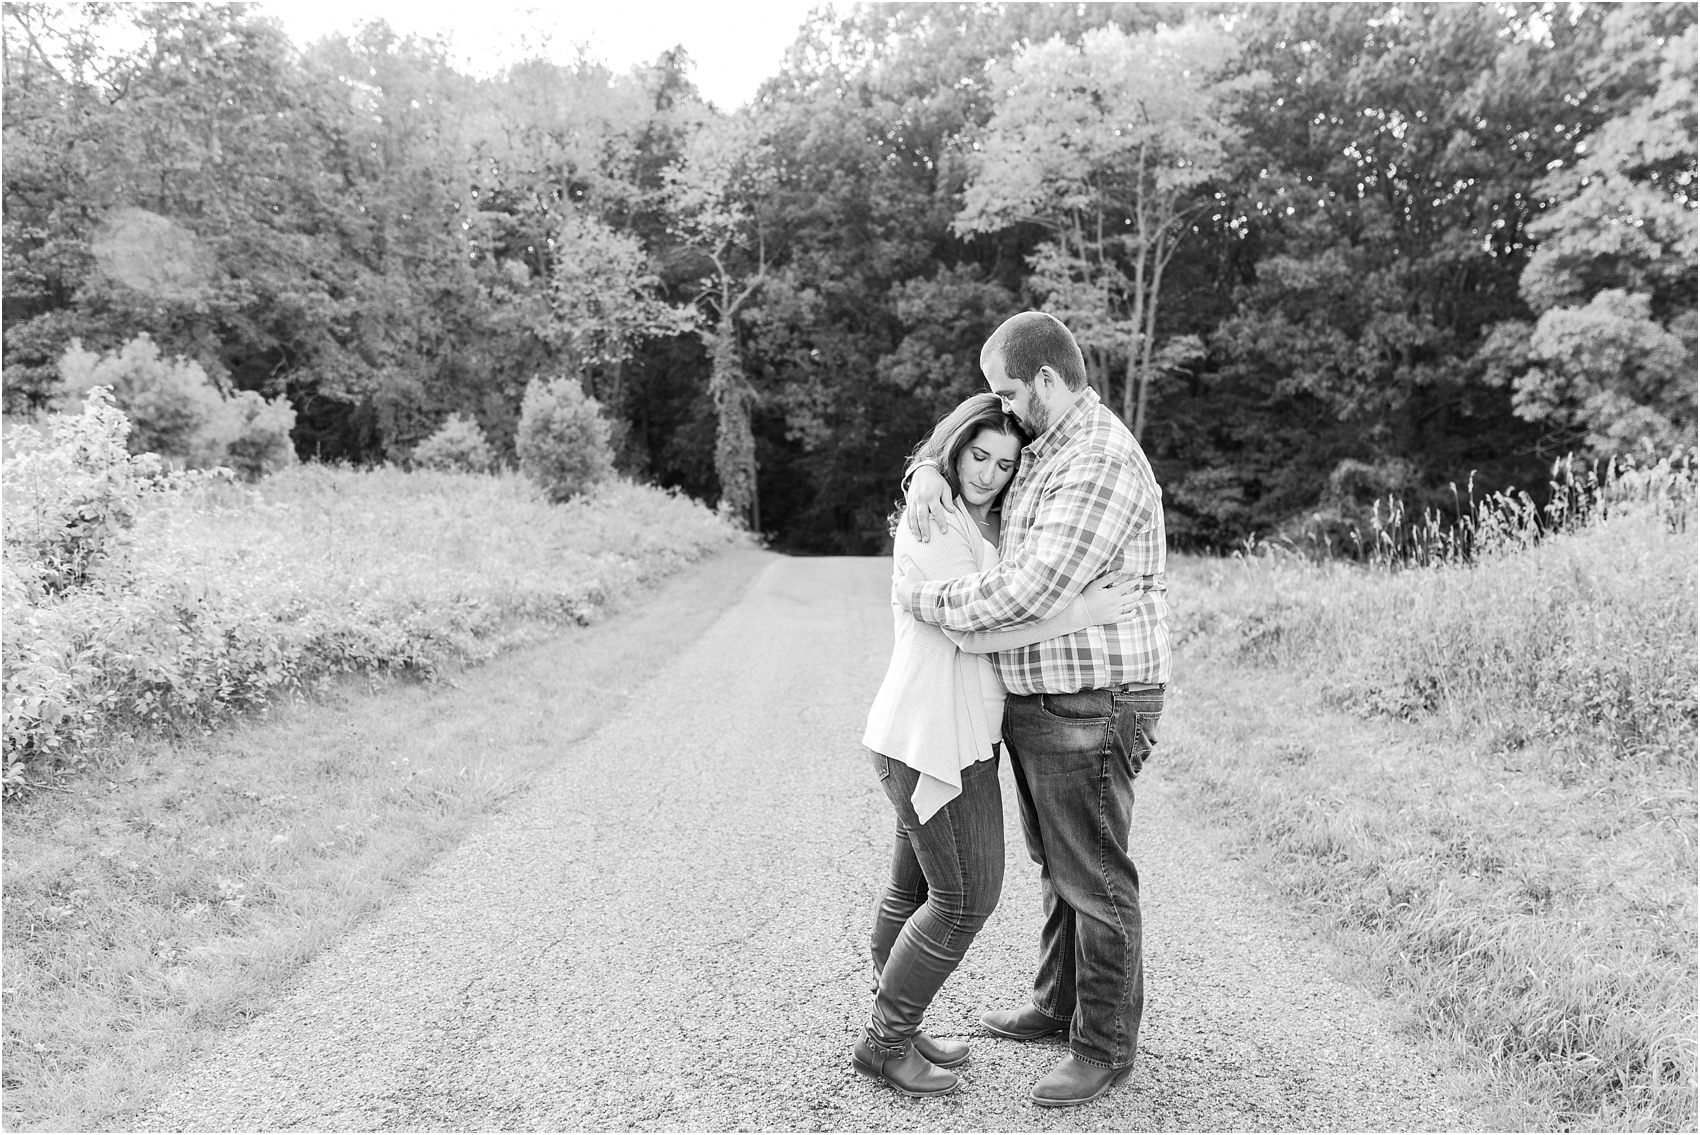 candid-romantic-summer-engagement-photos-at-hidden-lake-gardens-and-black-fire-winery-in-tipton-mi-by-courtney-carolyn-photography_0039.jpg